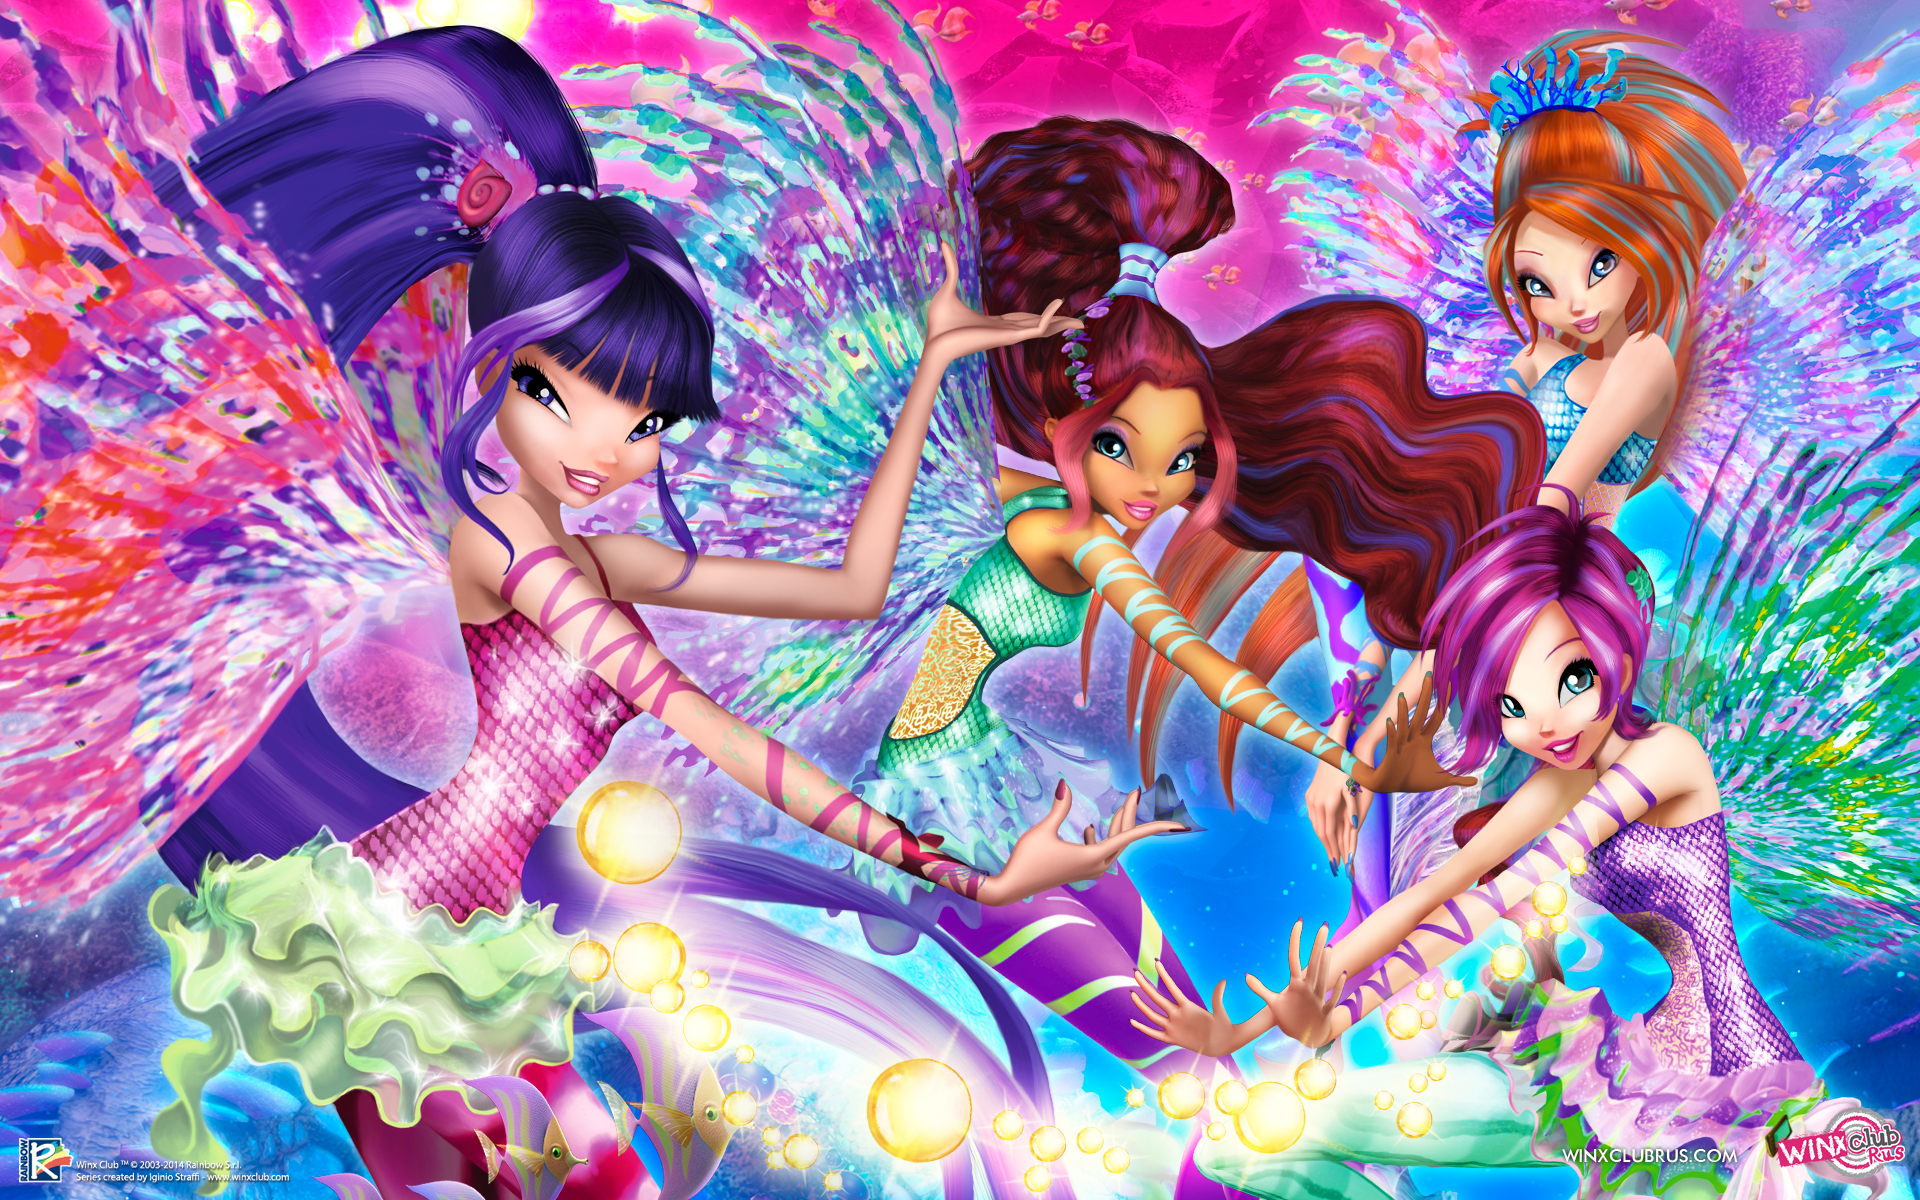 Winx Club New Bright And Colorful Wallpapers With Lots Of Transformations And Styles Youloveit Com